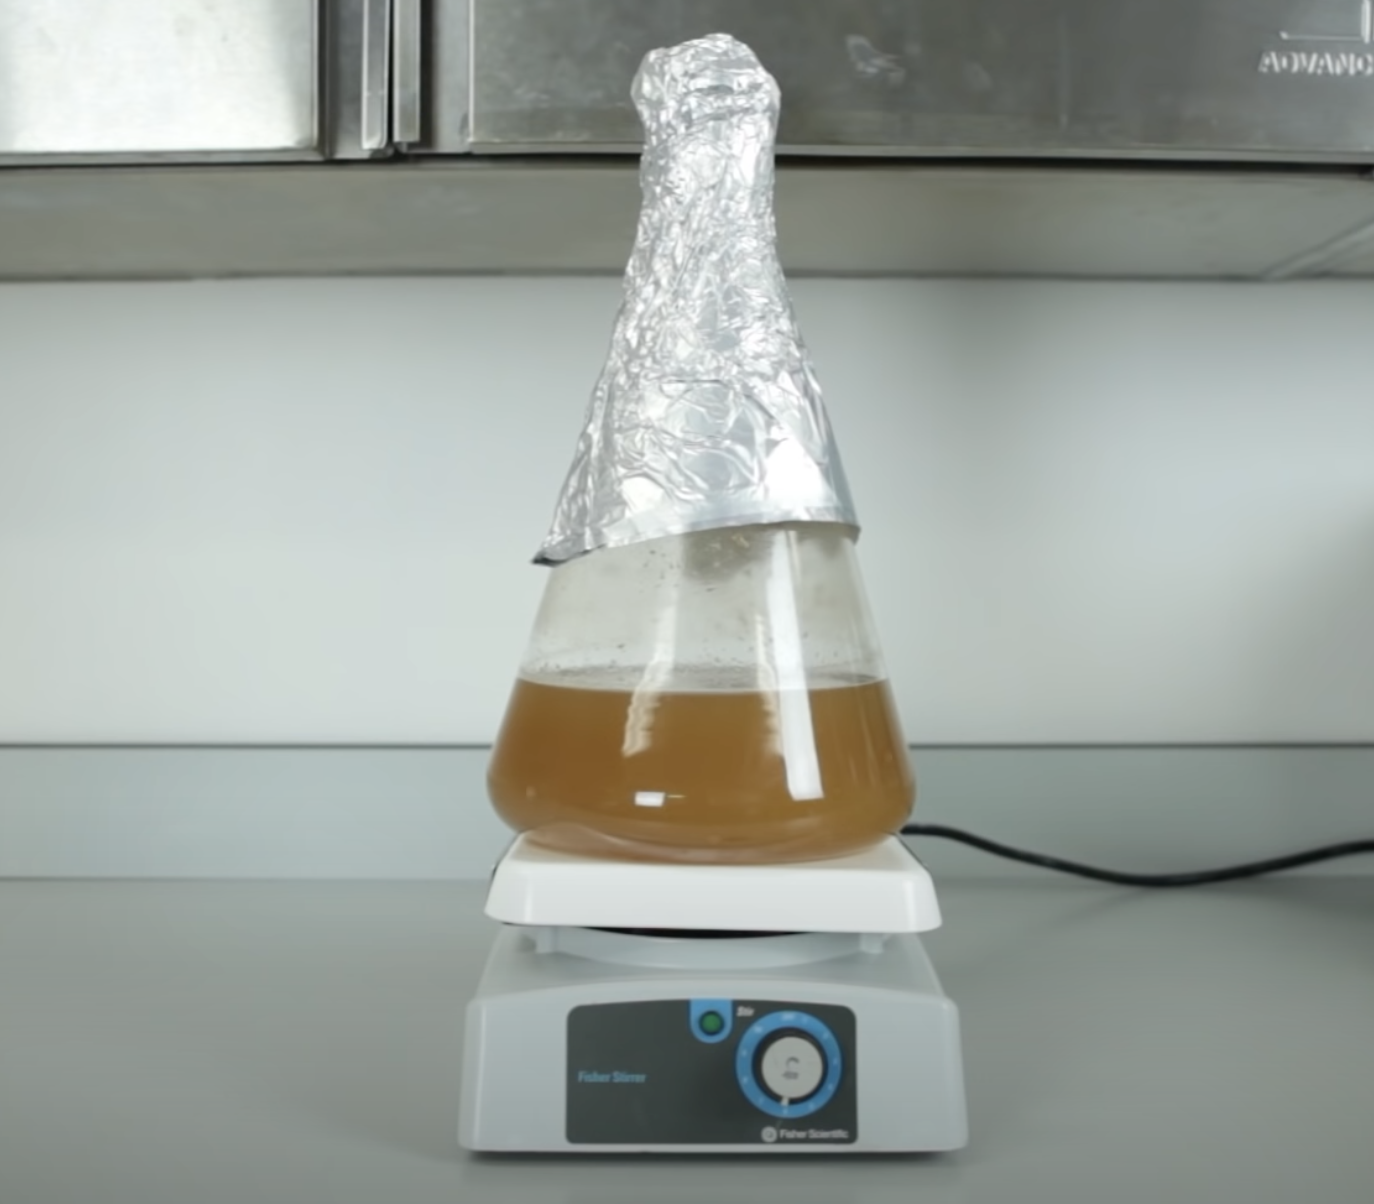 How to Make a Yeast Starter 101-4